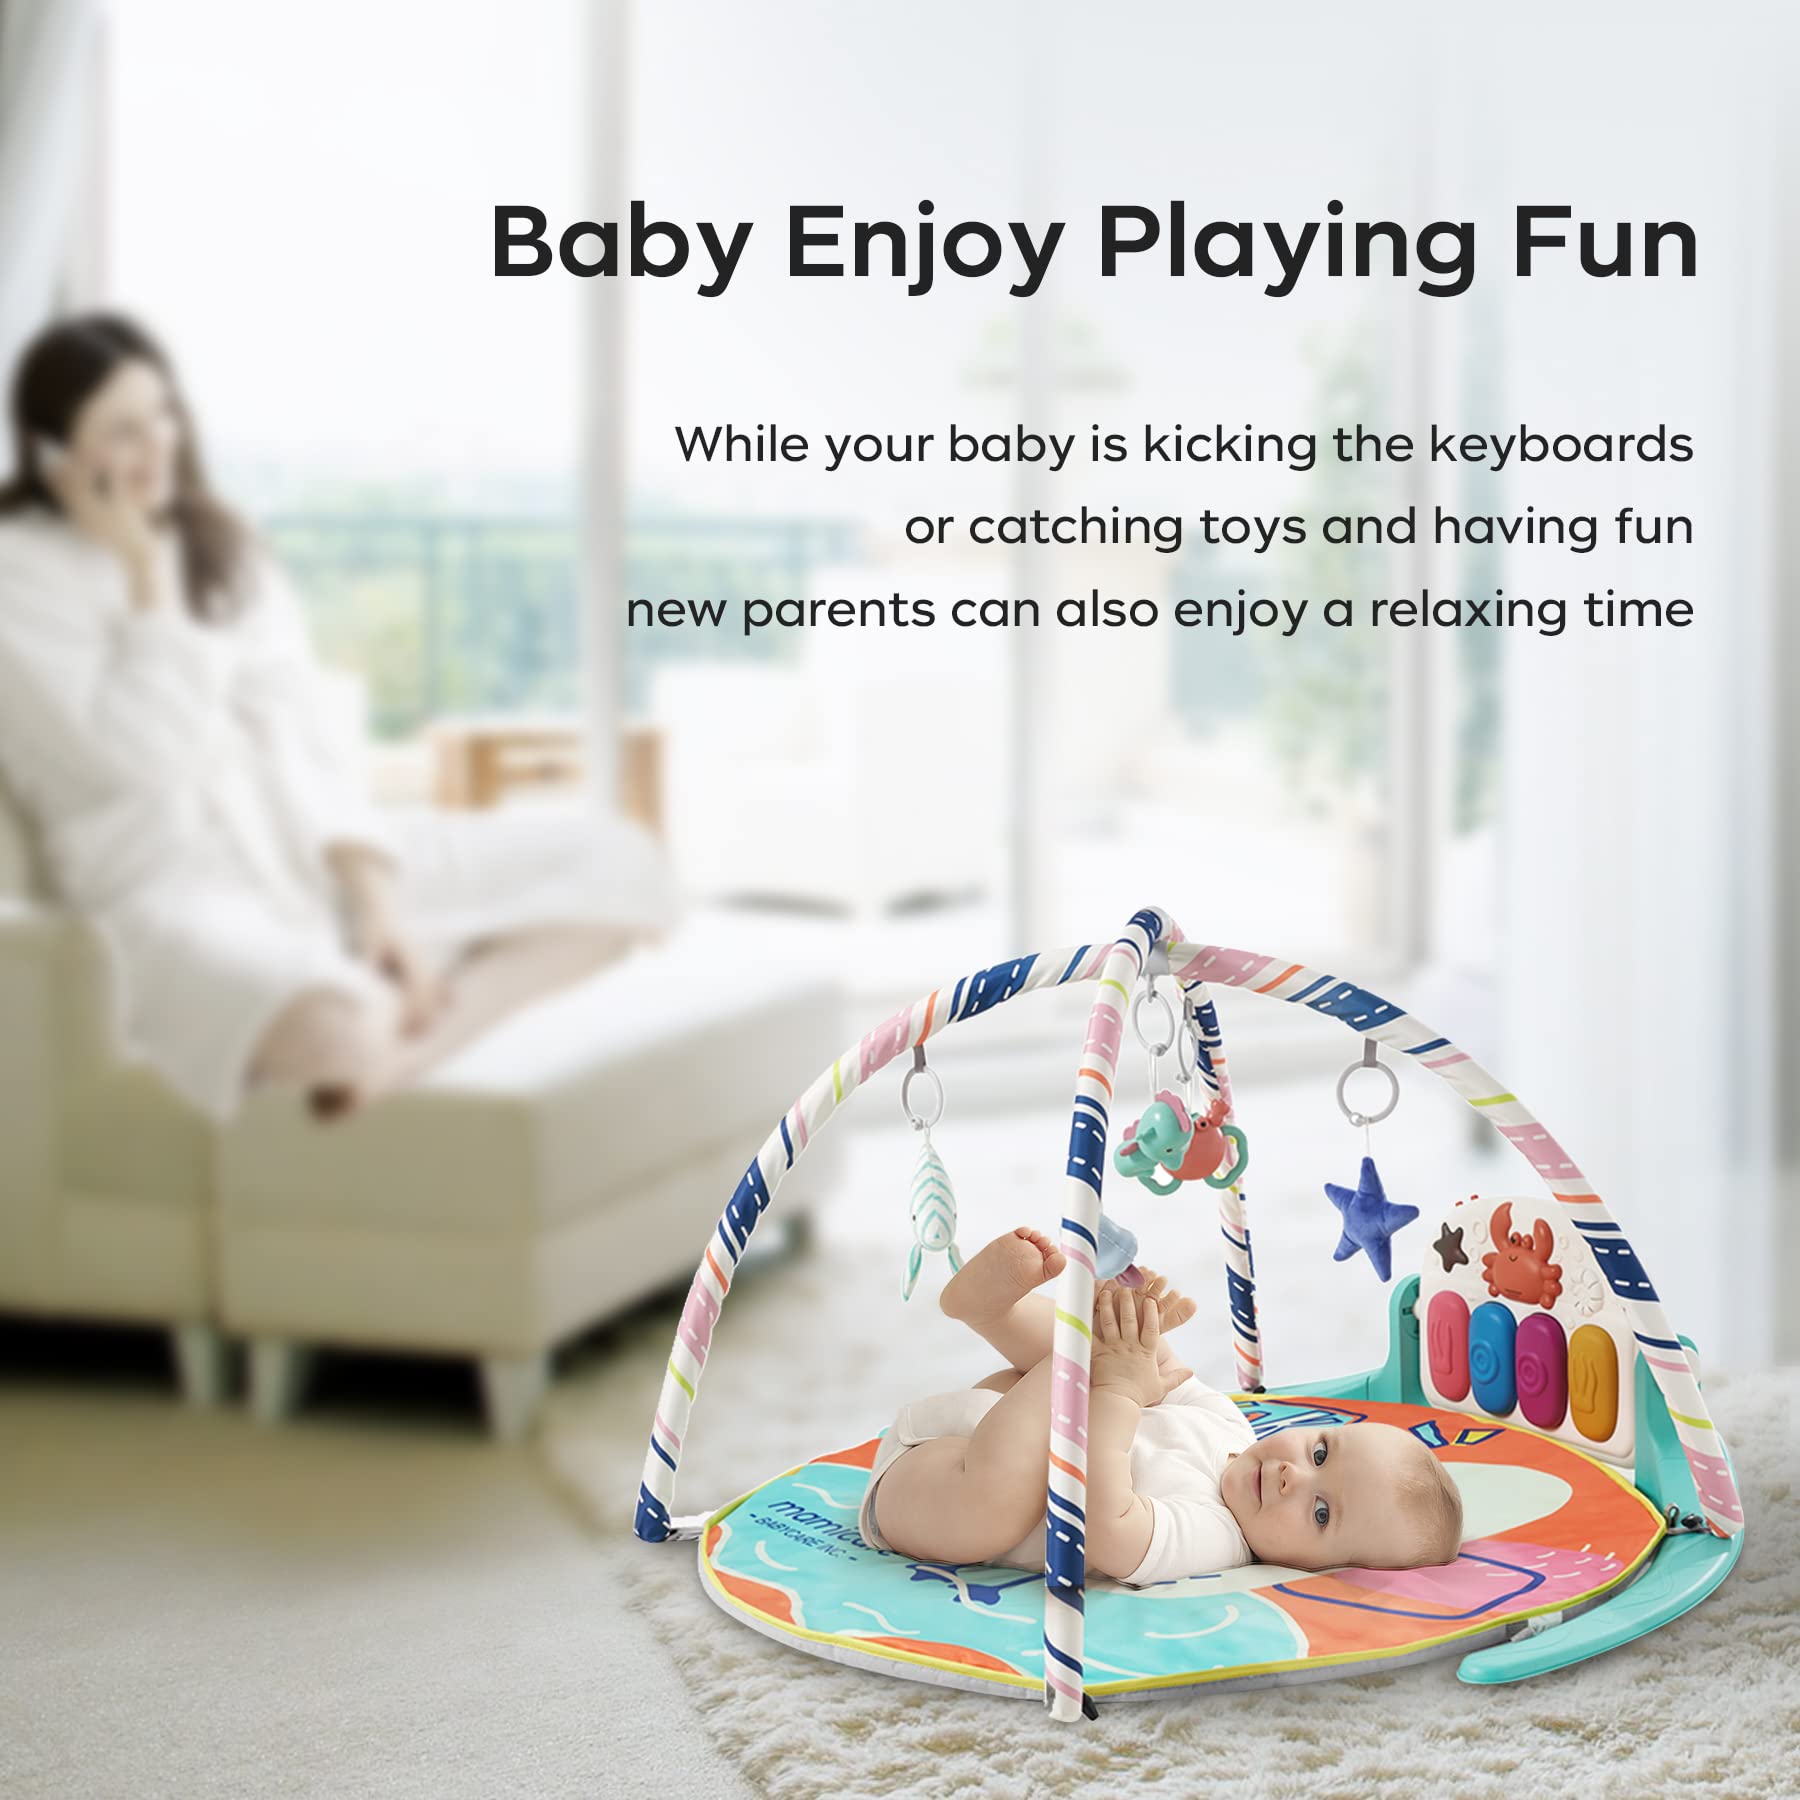 bc babycare 4-in-1 Baby Play Gym with 3 Music Modes Adjustment,Kick and Play Piano Gym Baby Play Mats for Floor LED Lights Tummy Time Mat